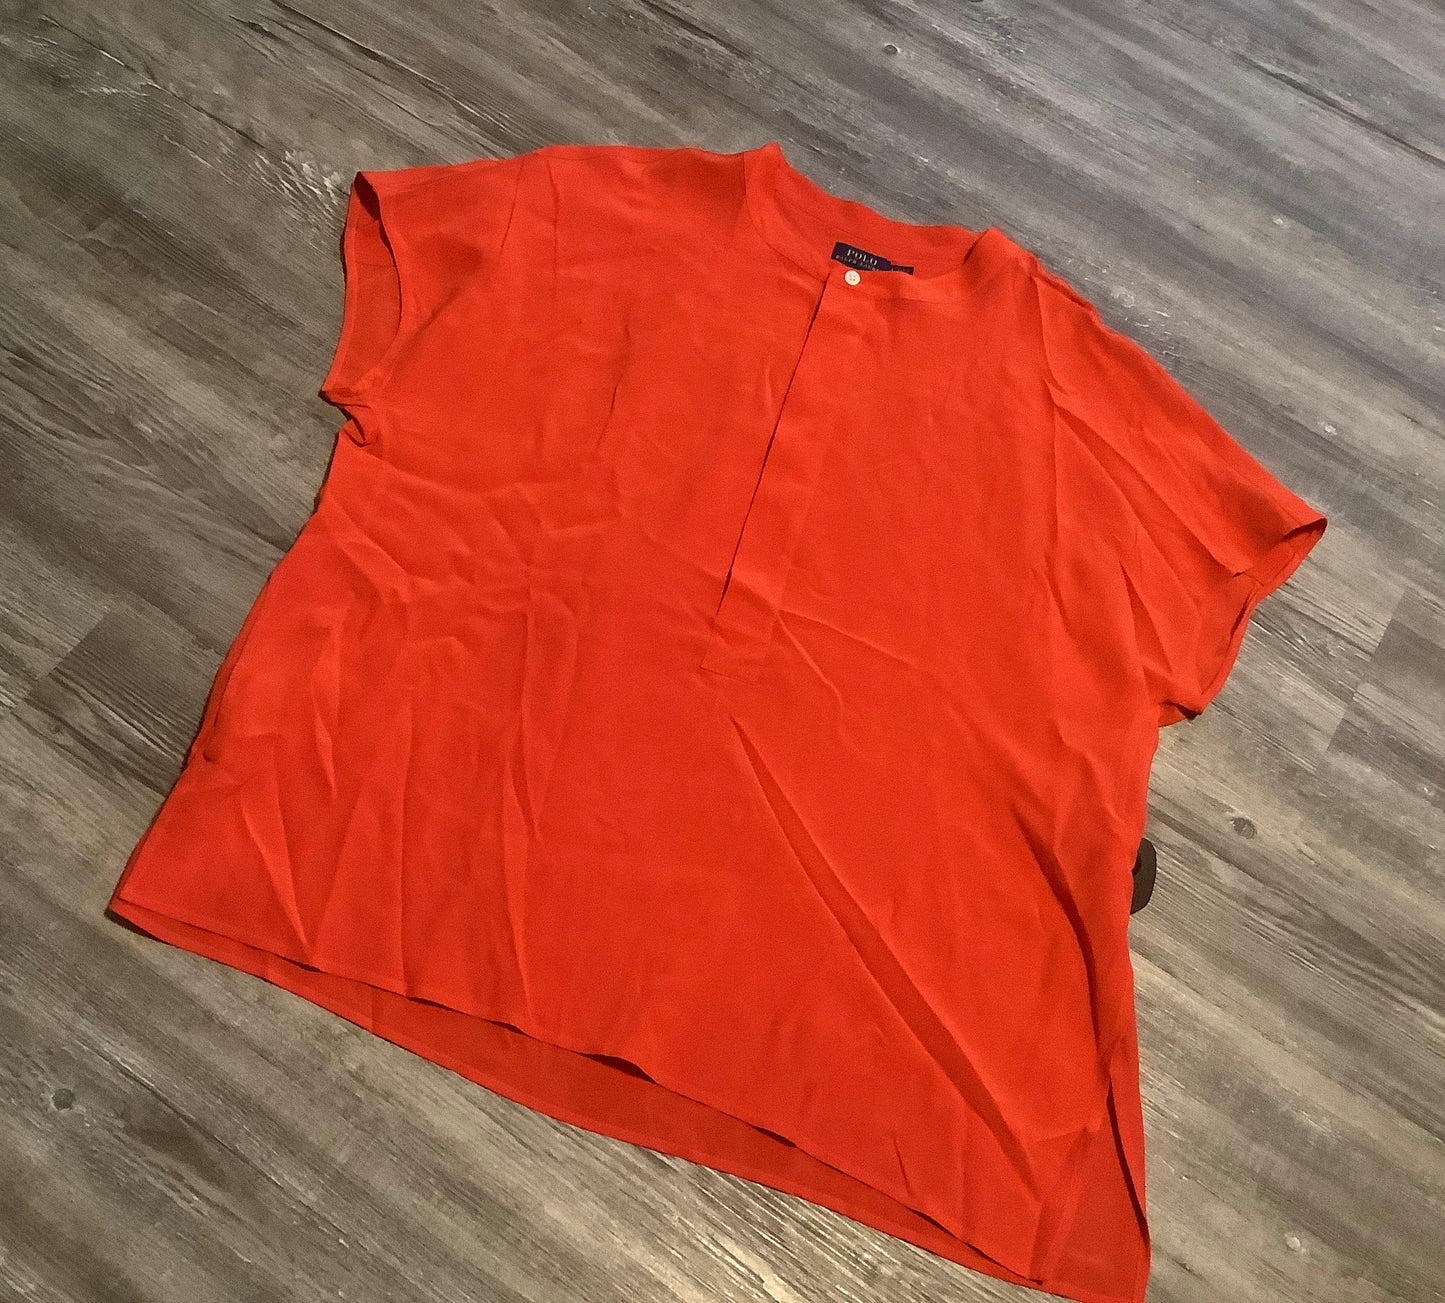 Red Top Short Sleeve Polo Ralph Lauren, Size L